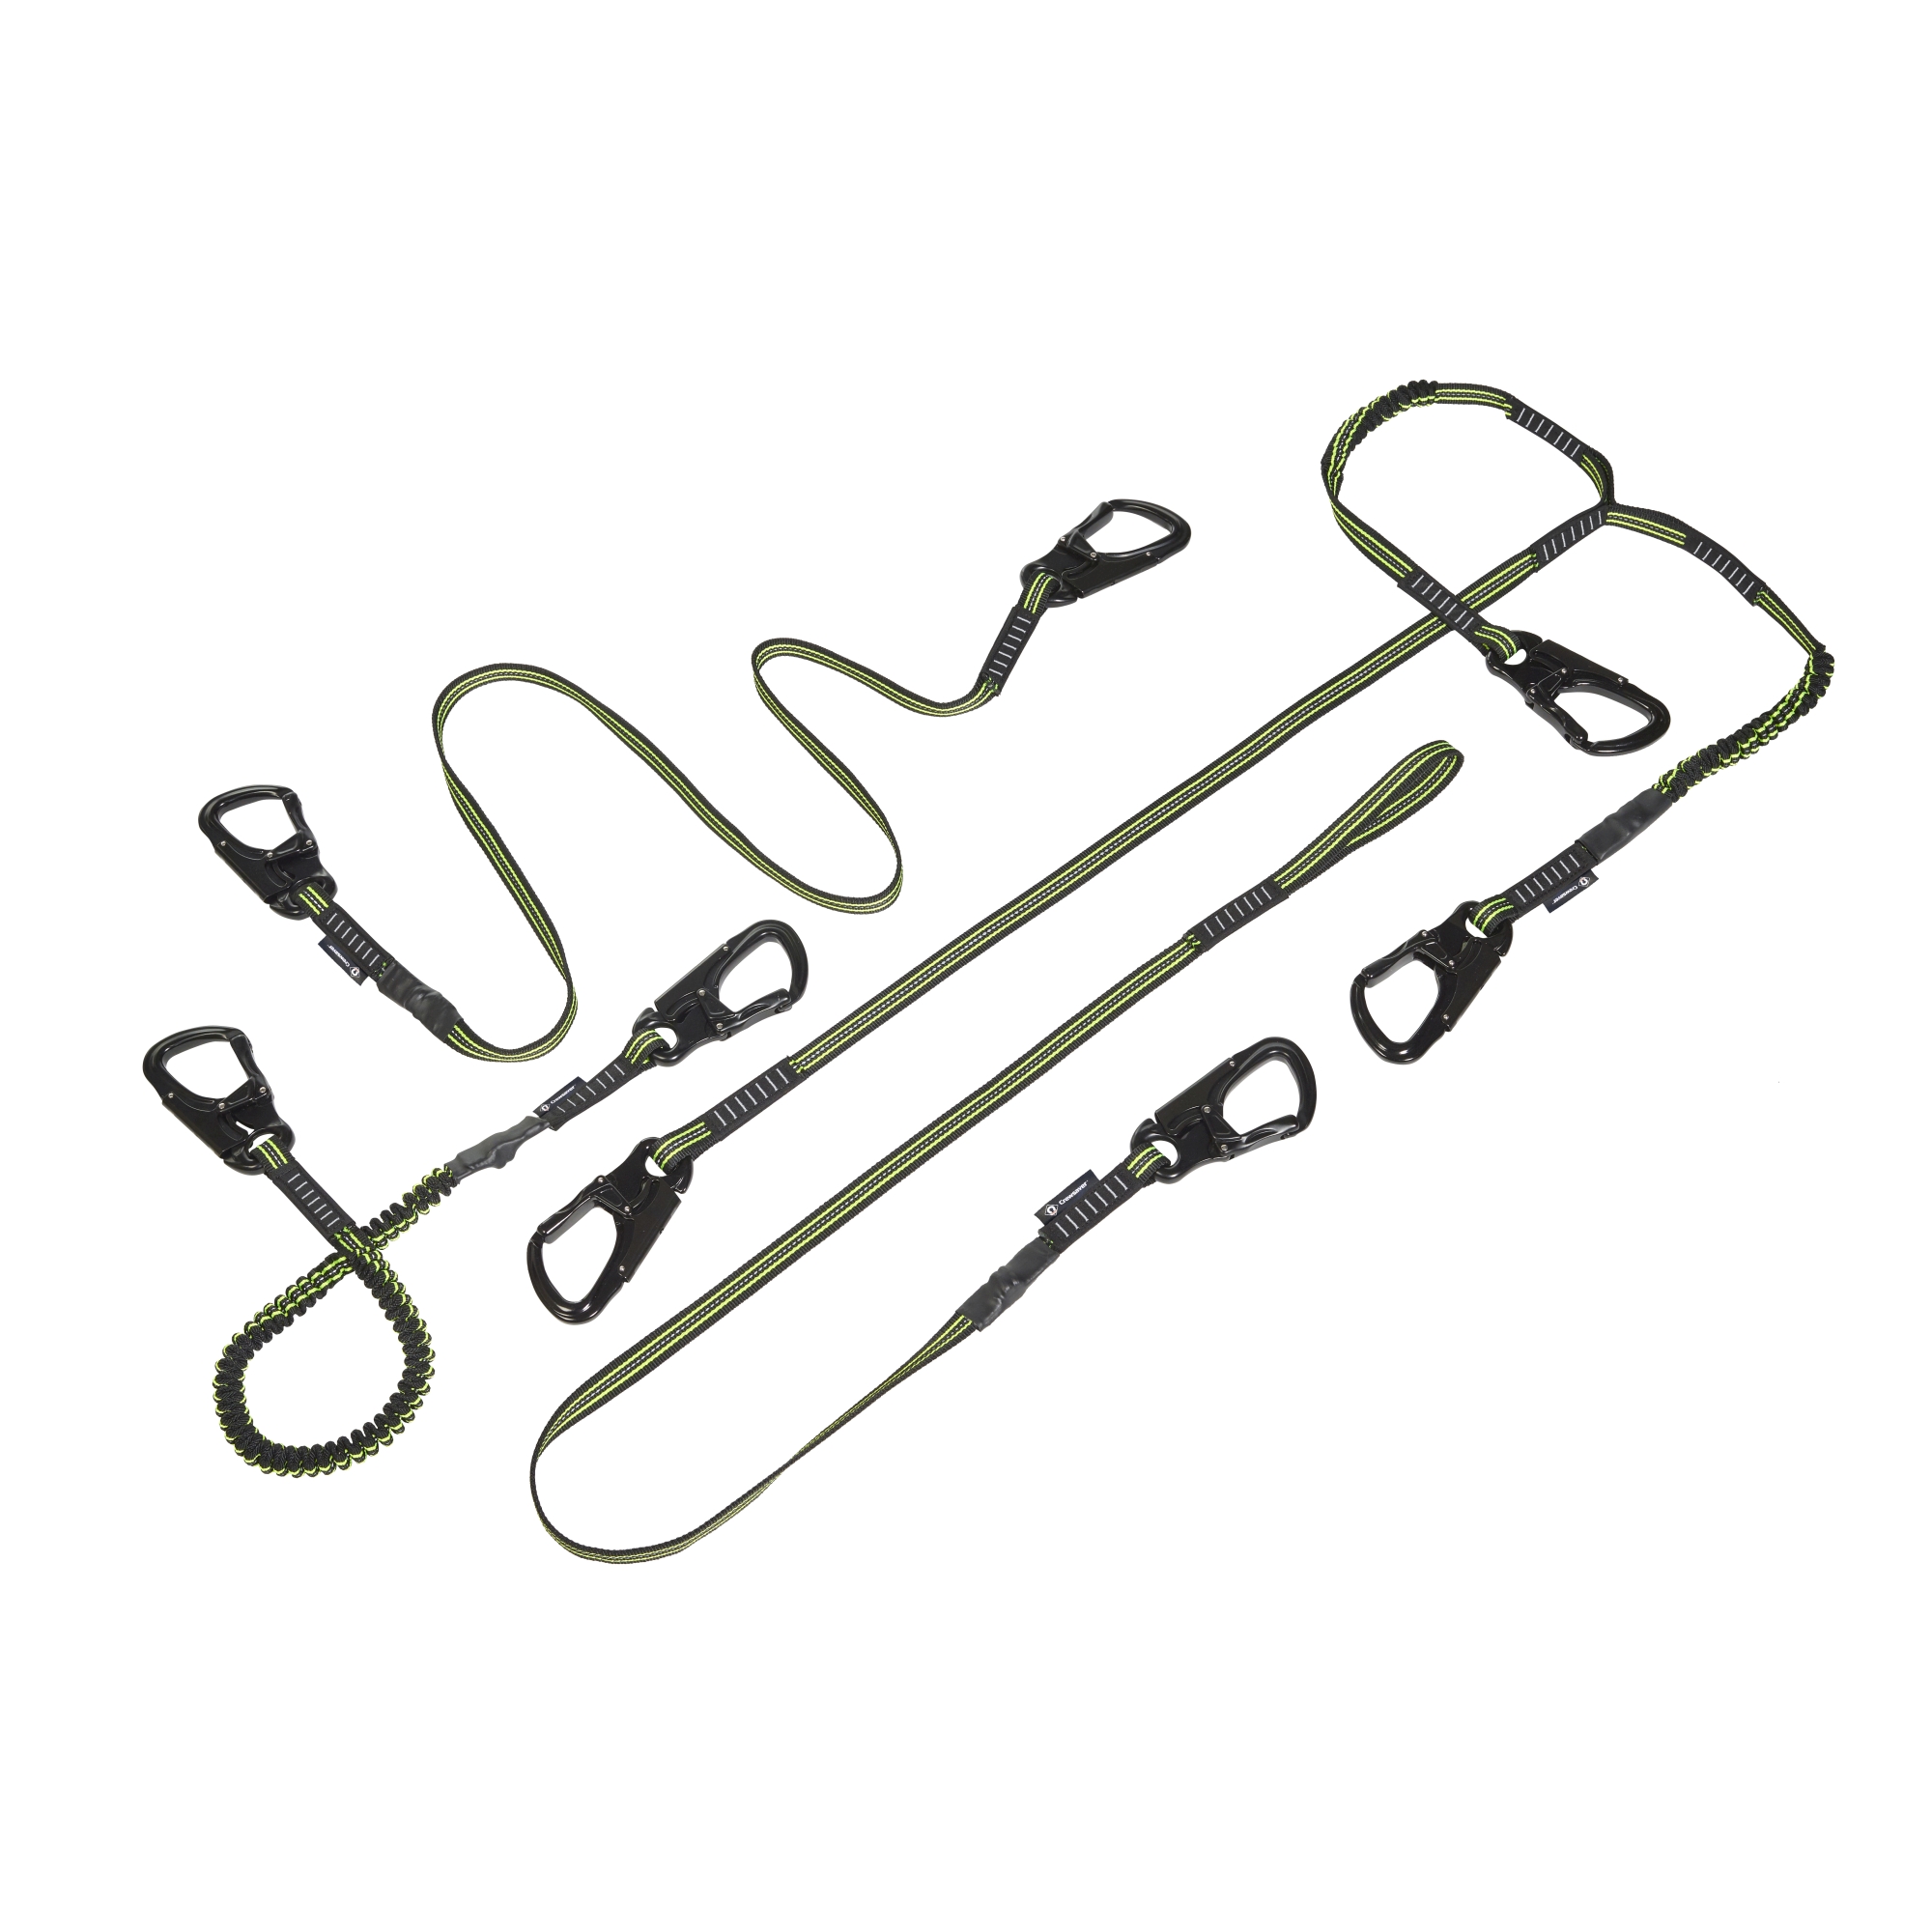 Crewline Pro Triple Hook Elasticated - with load ind